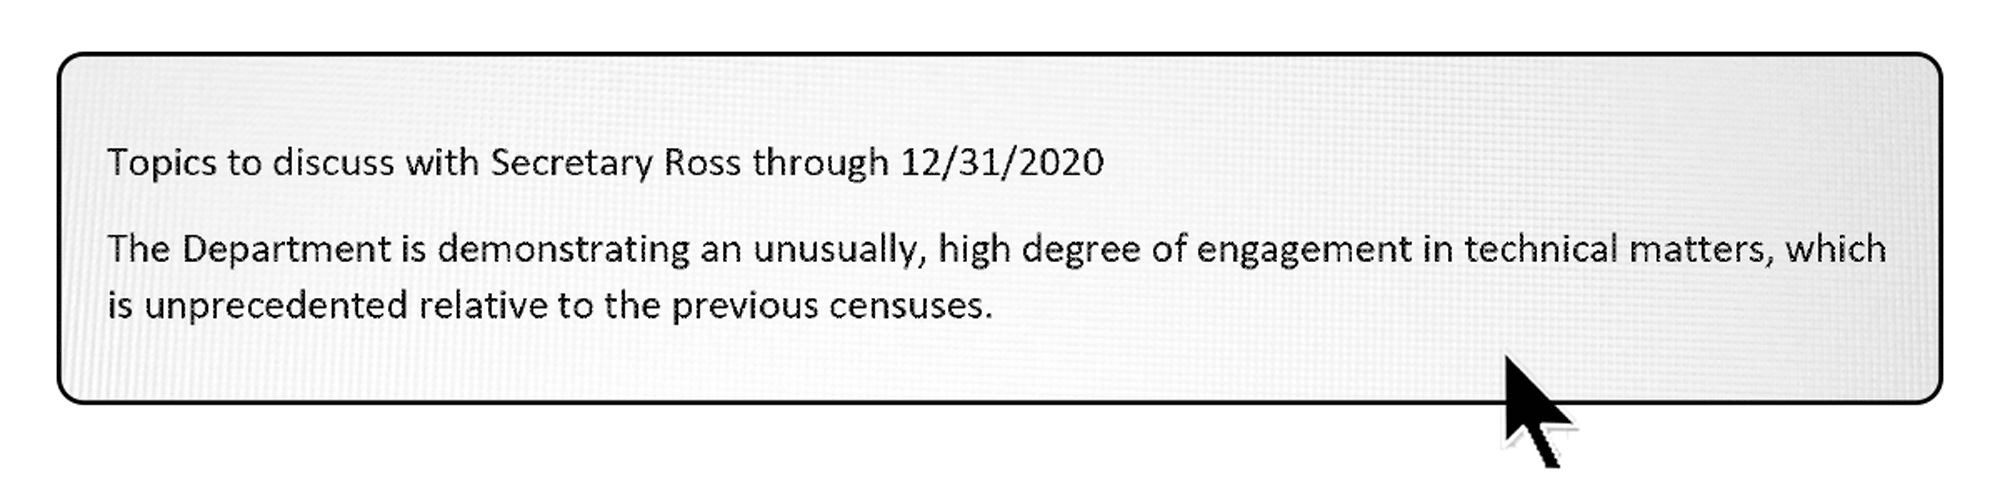 Excerpt from Census Bureau email